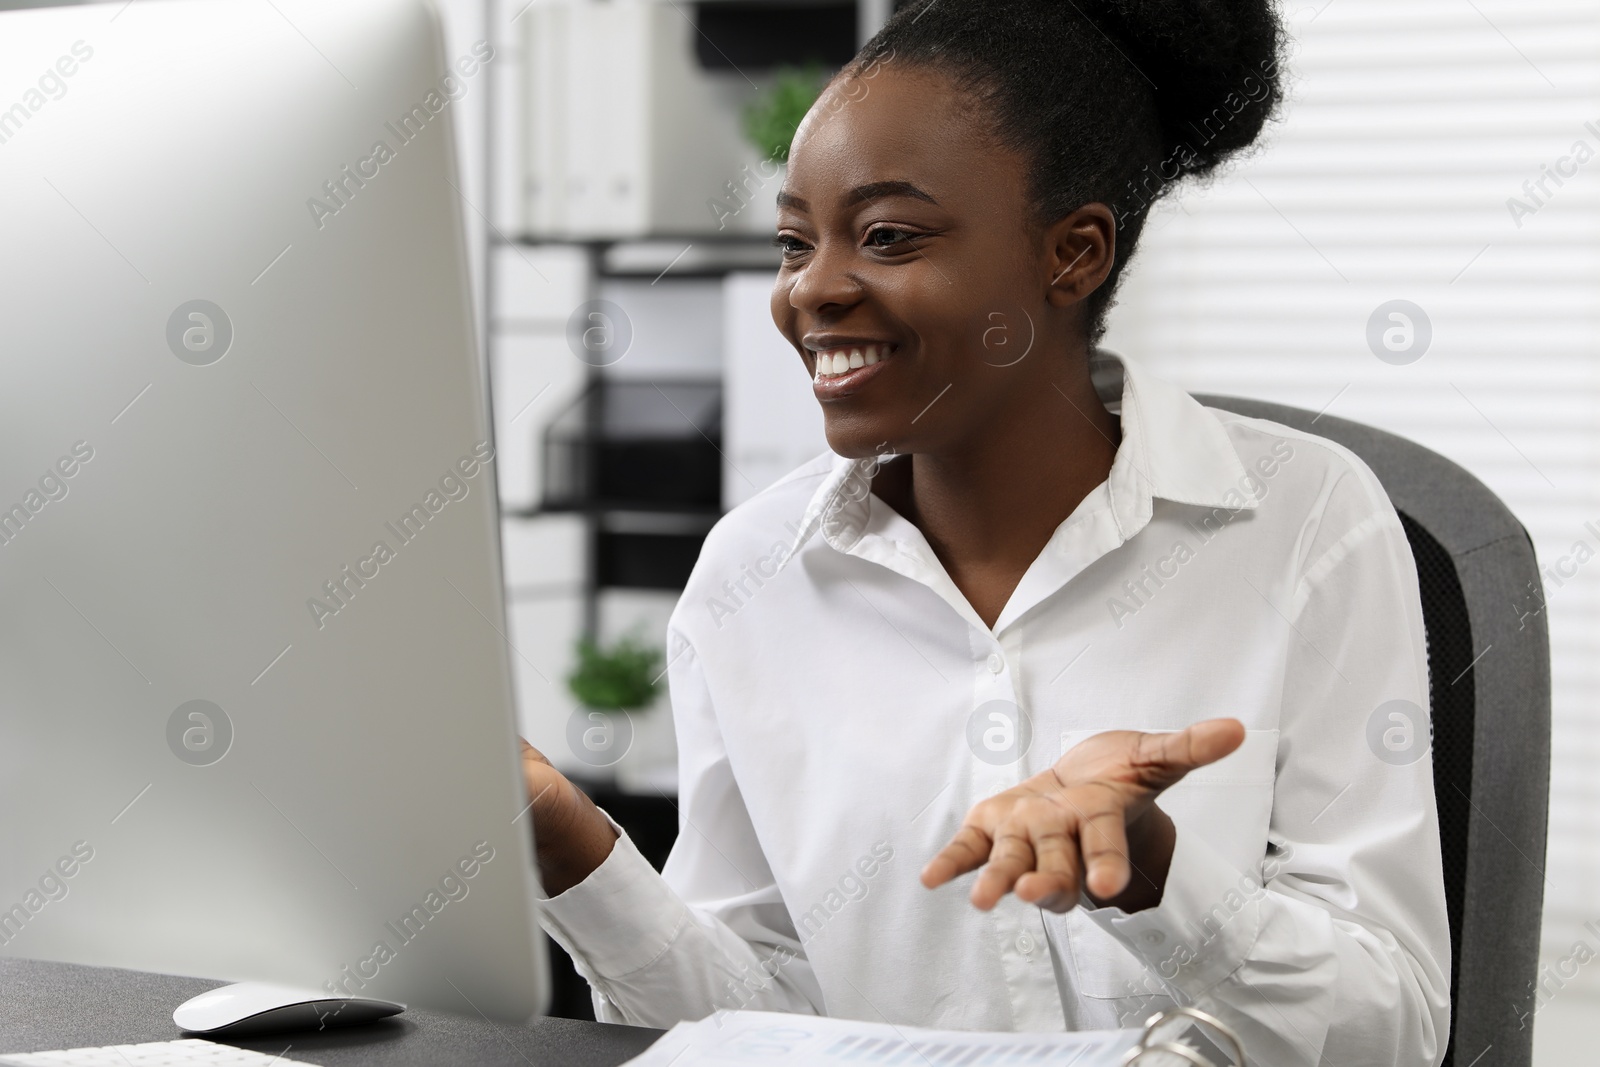 Photo of Professional accountant having video chat via computer at desk in office